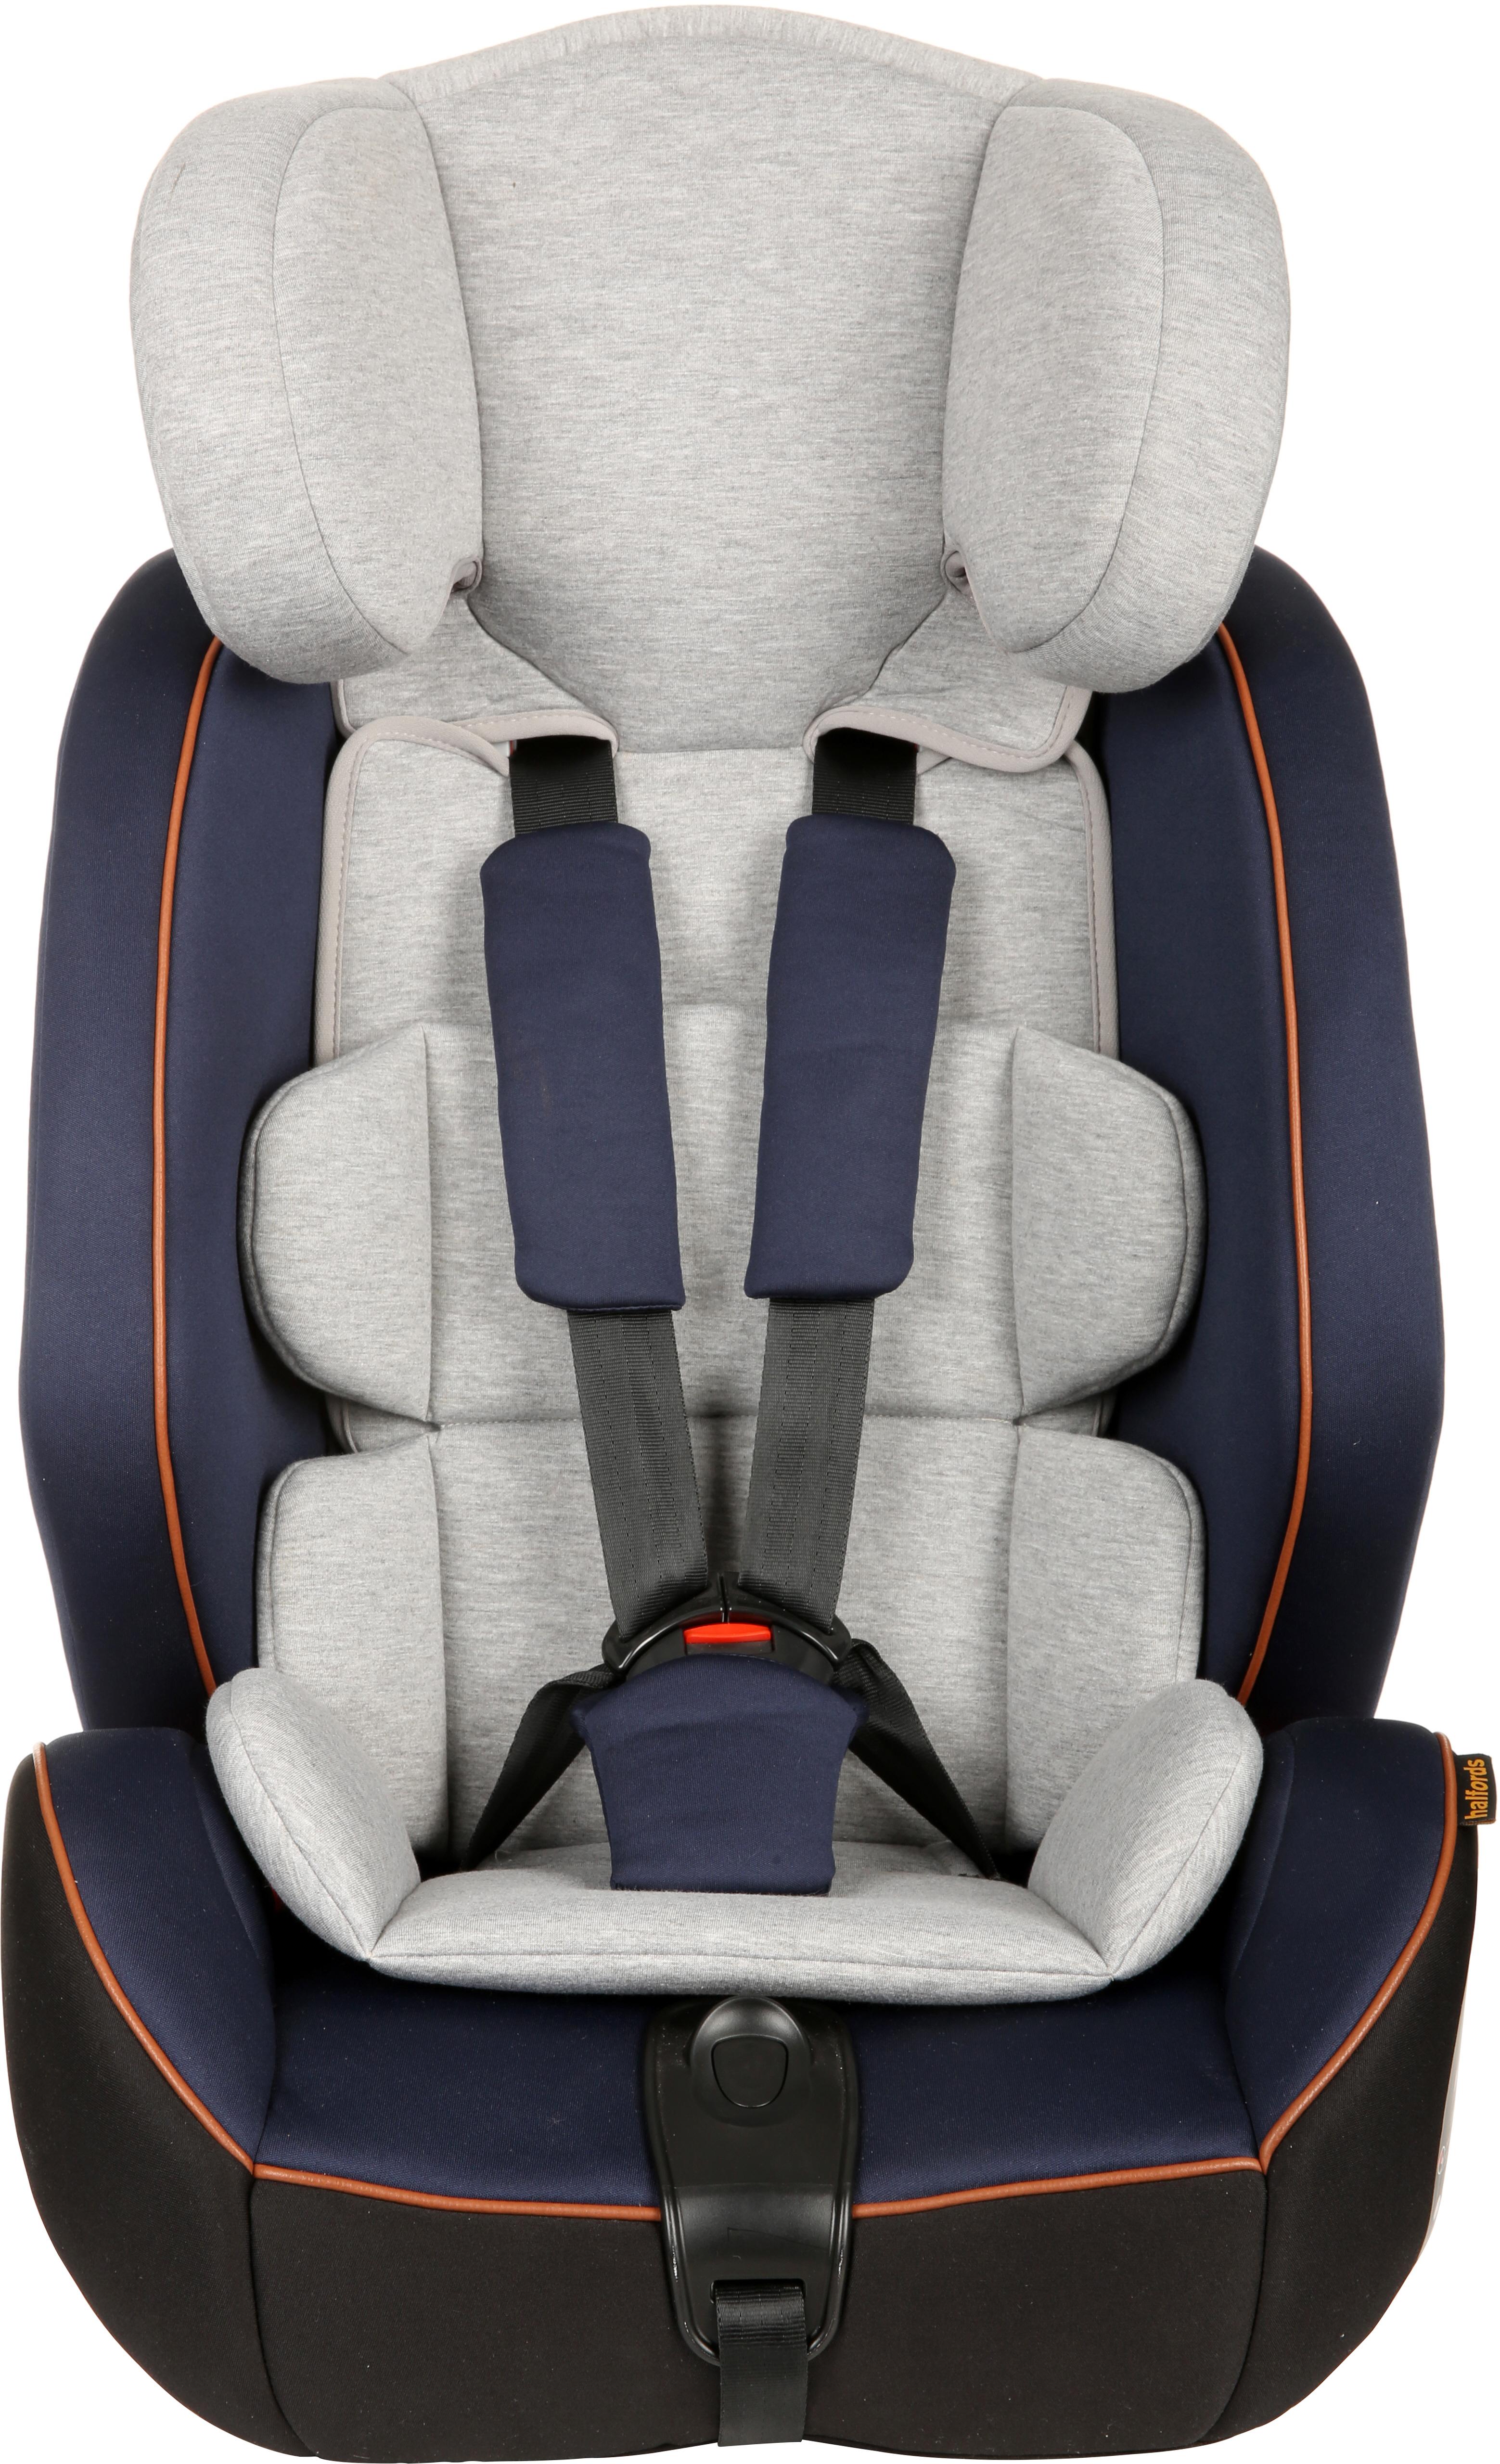 3 Isofix Child Car Seat with Top Tether 